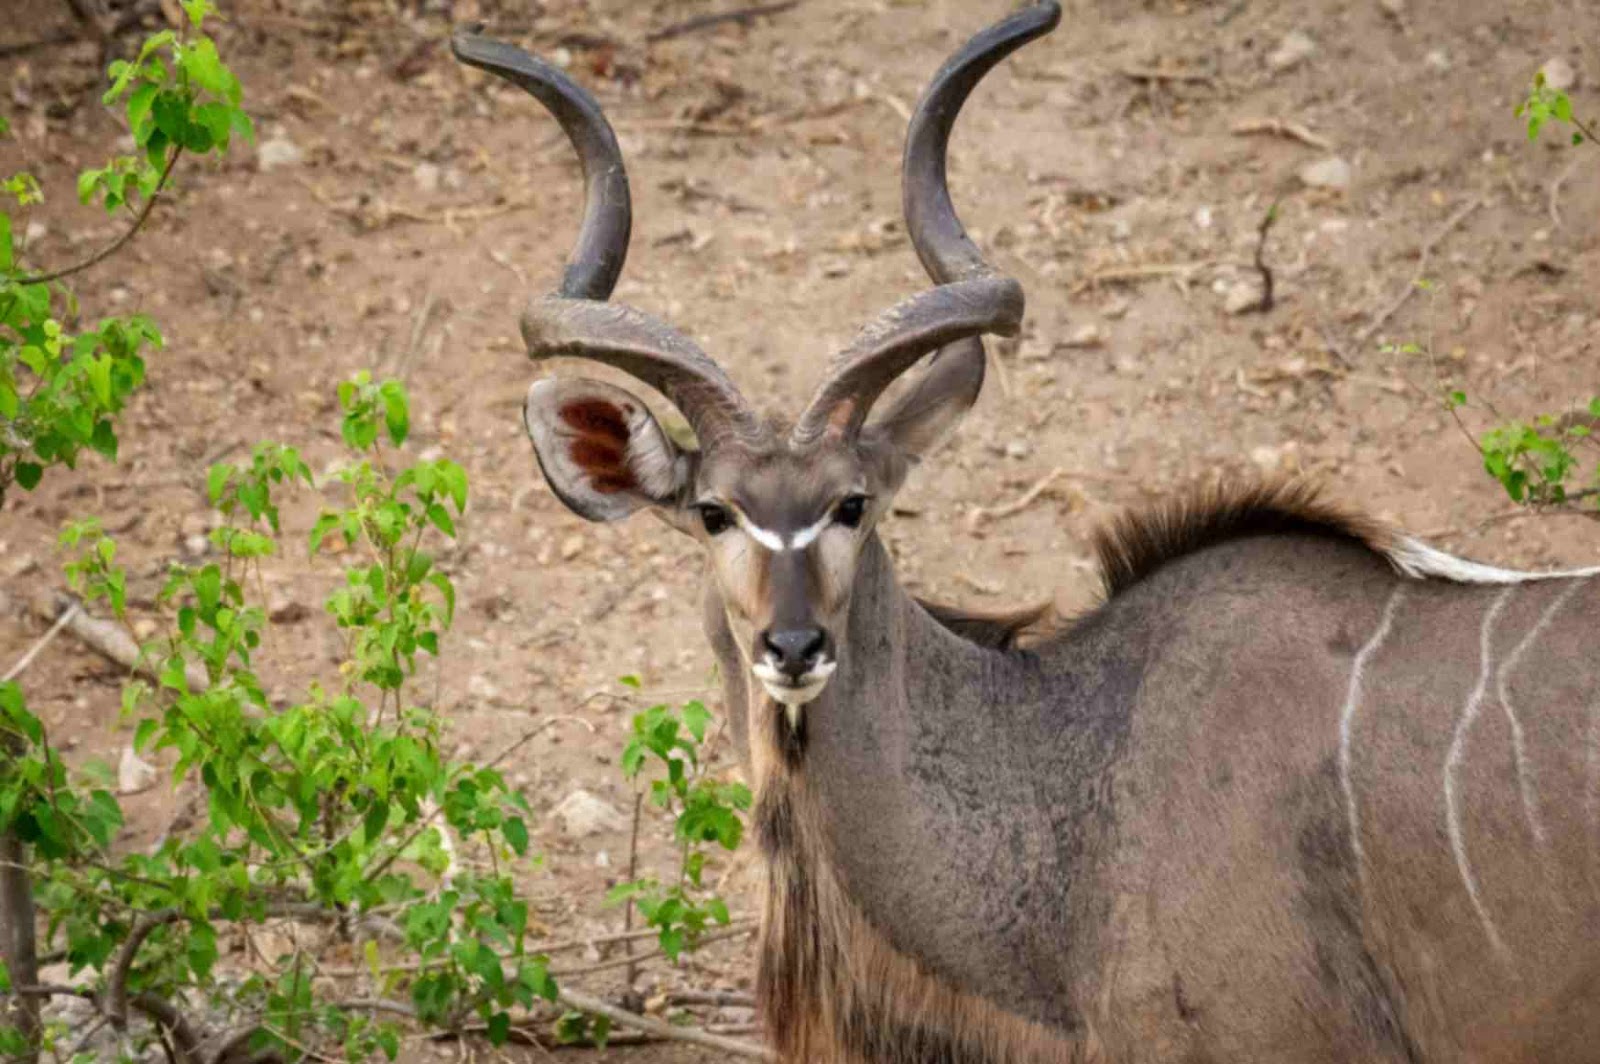 kudu is an antelope bearing spiraled horns, large ears, and white body stripes find them in  chobe national park